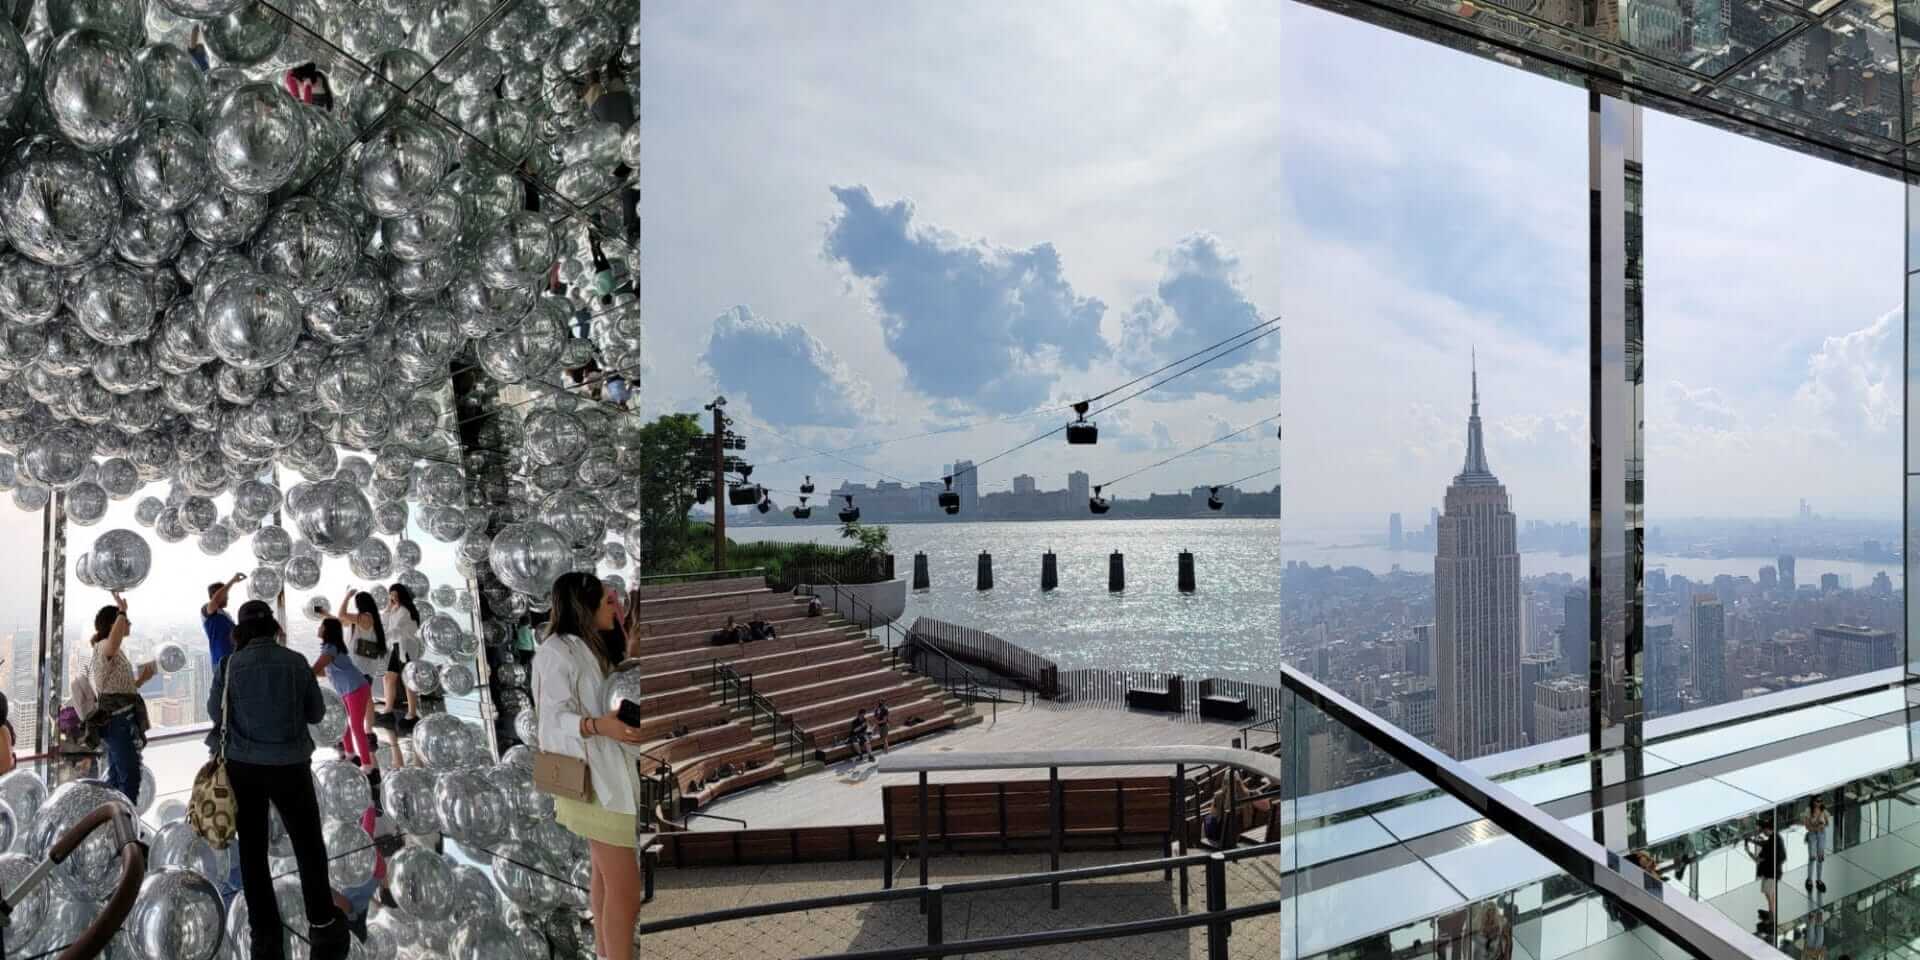 SUMMIT One Vanderbilt silver balloons and view of Empire State Building, and Little Island Amphitheatre